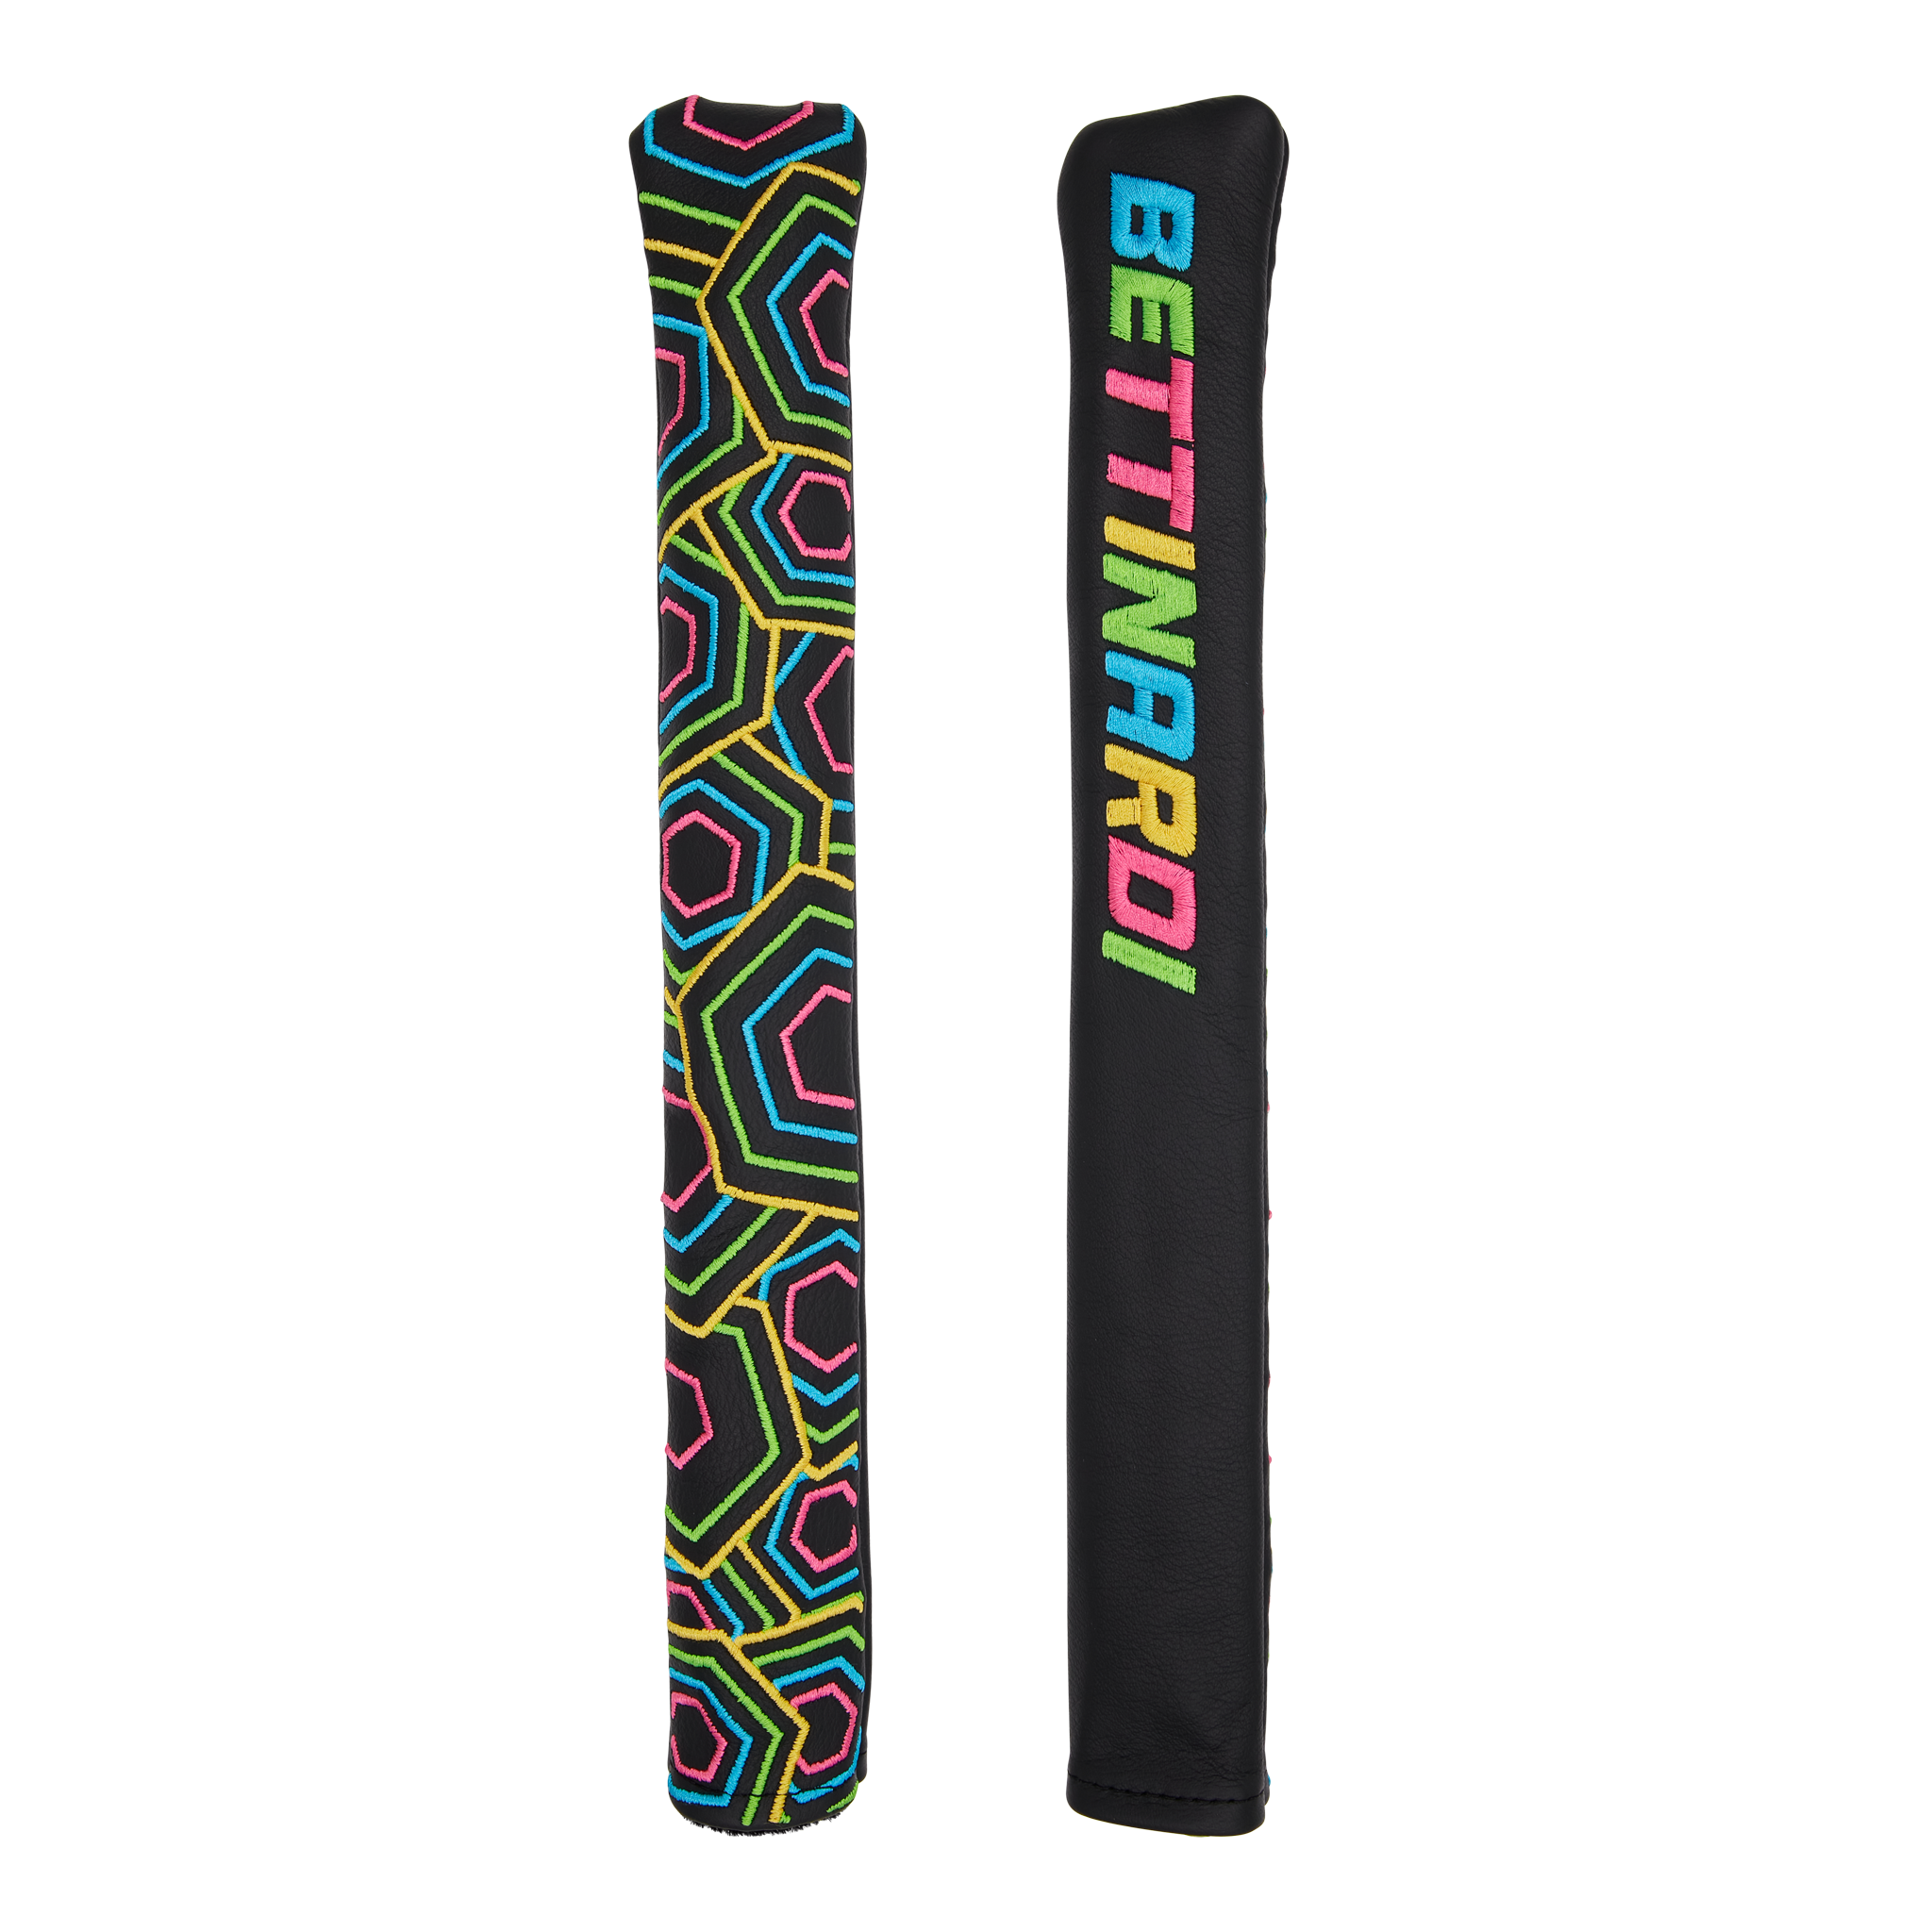 Bettinardi Neon Dialated Hexes Alignment Stick Cover-front and back